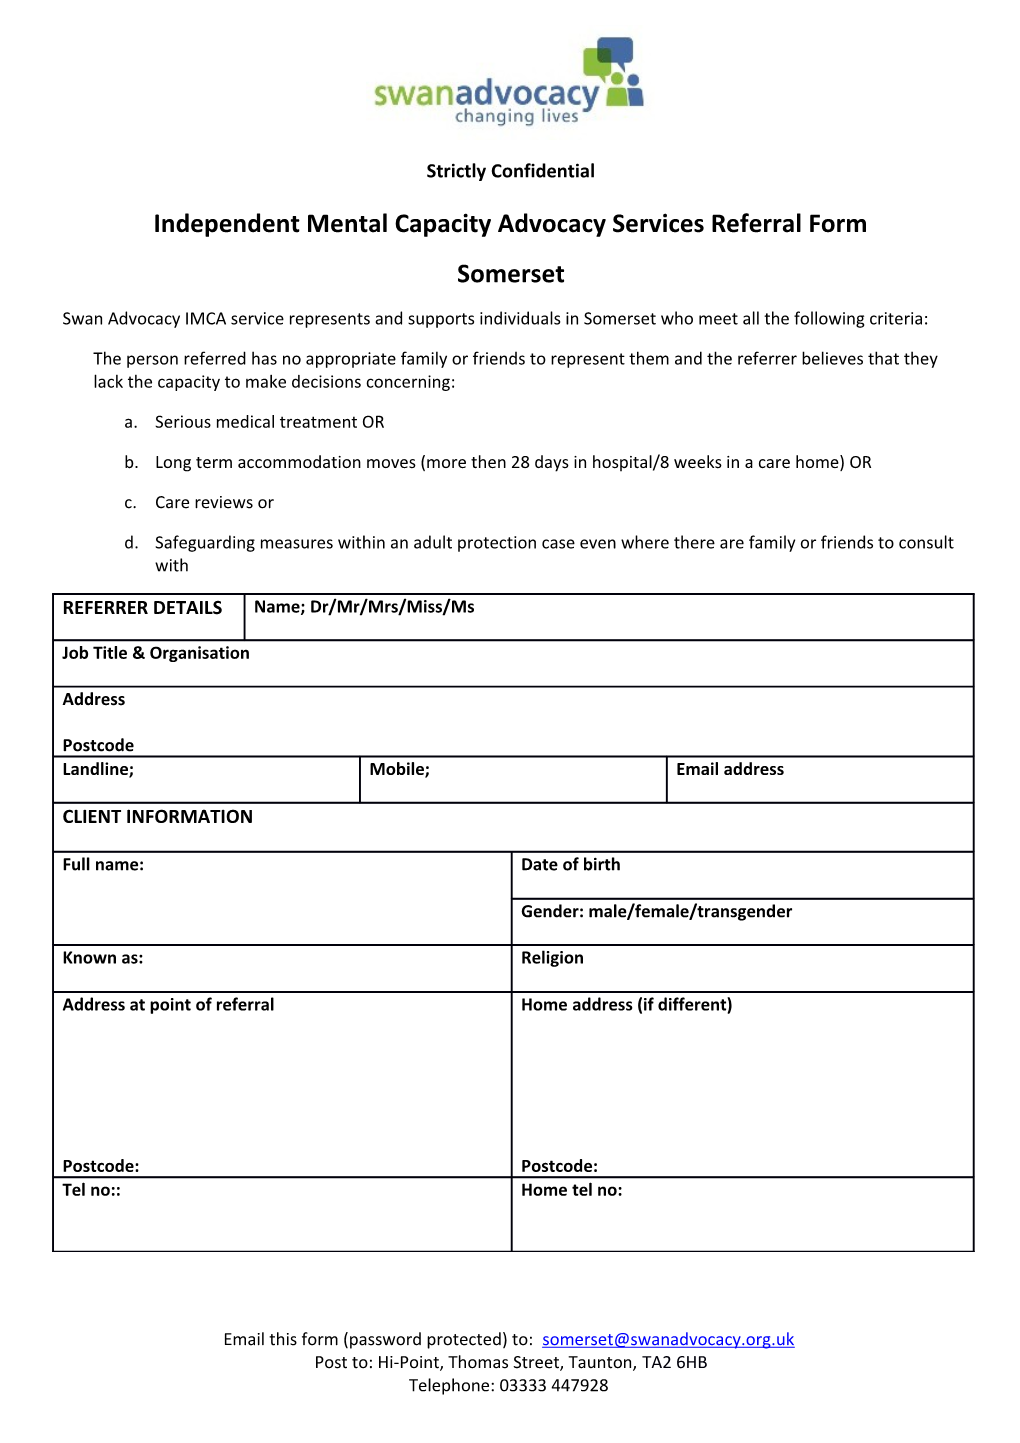 Independent Mental Capacity Advocacy Services Referral Form